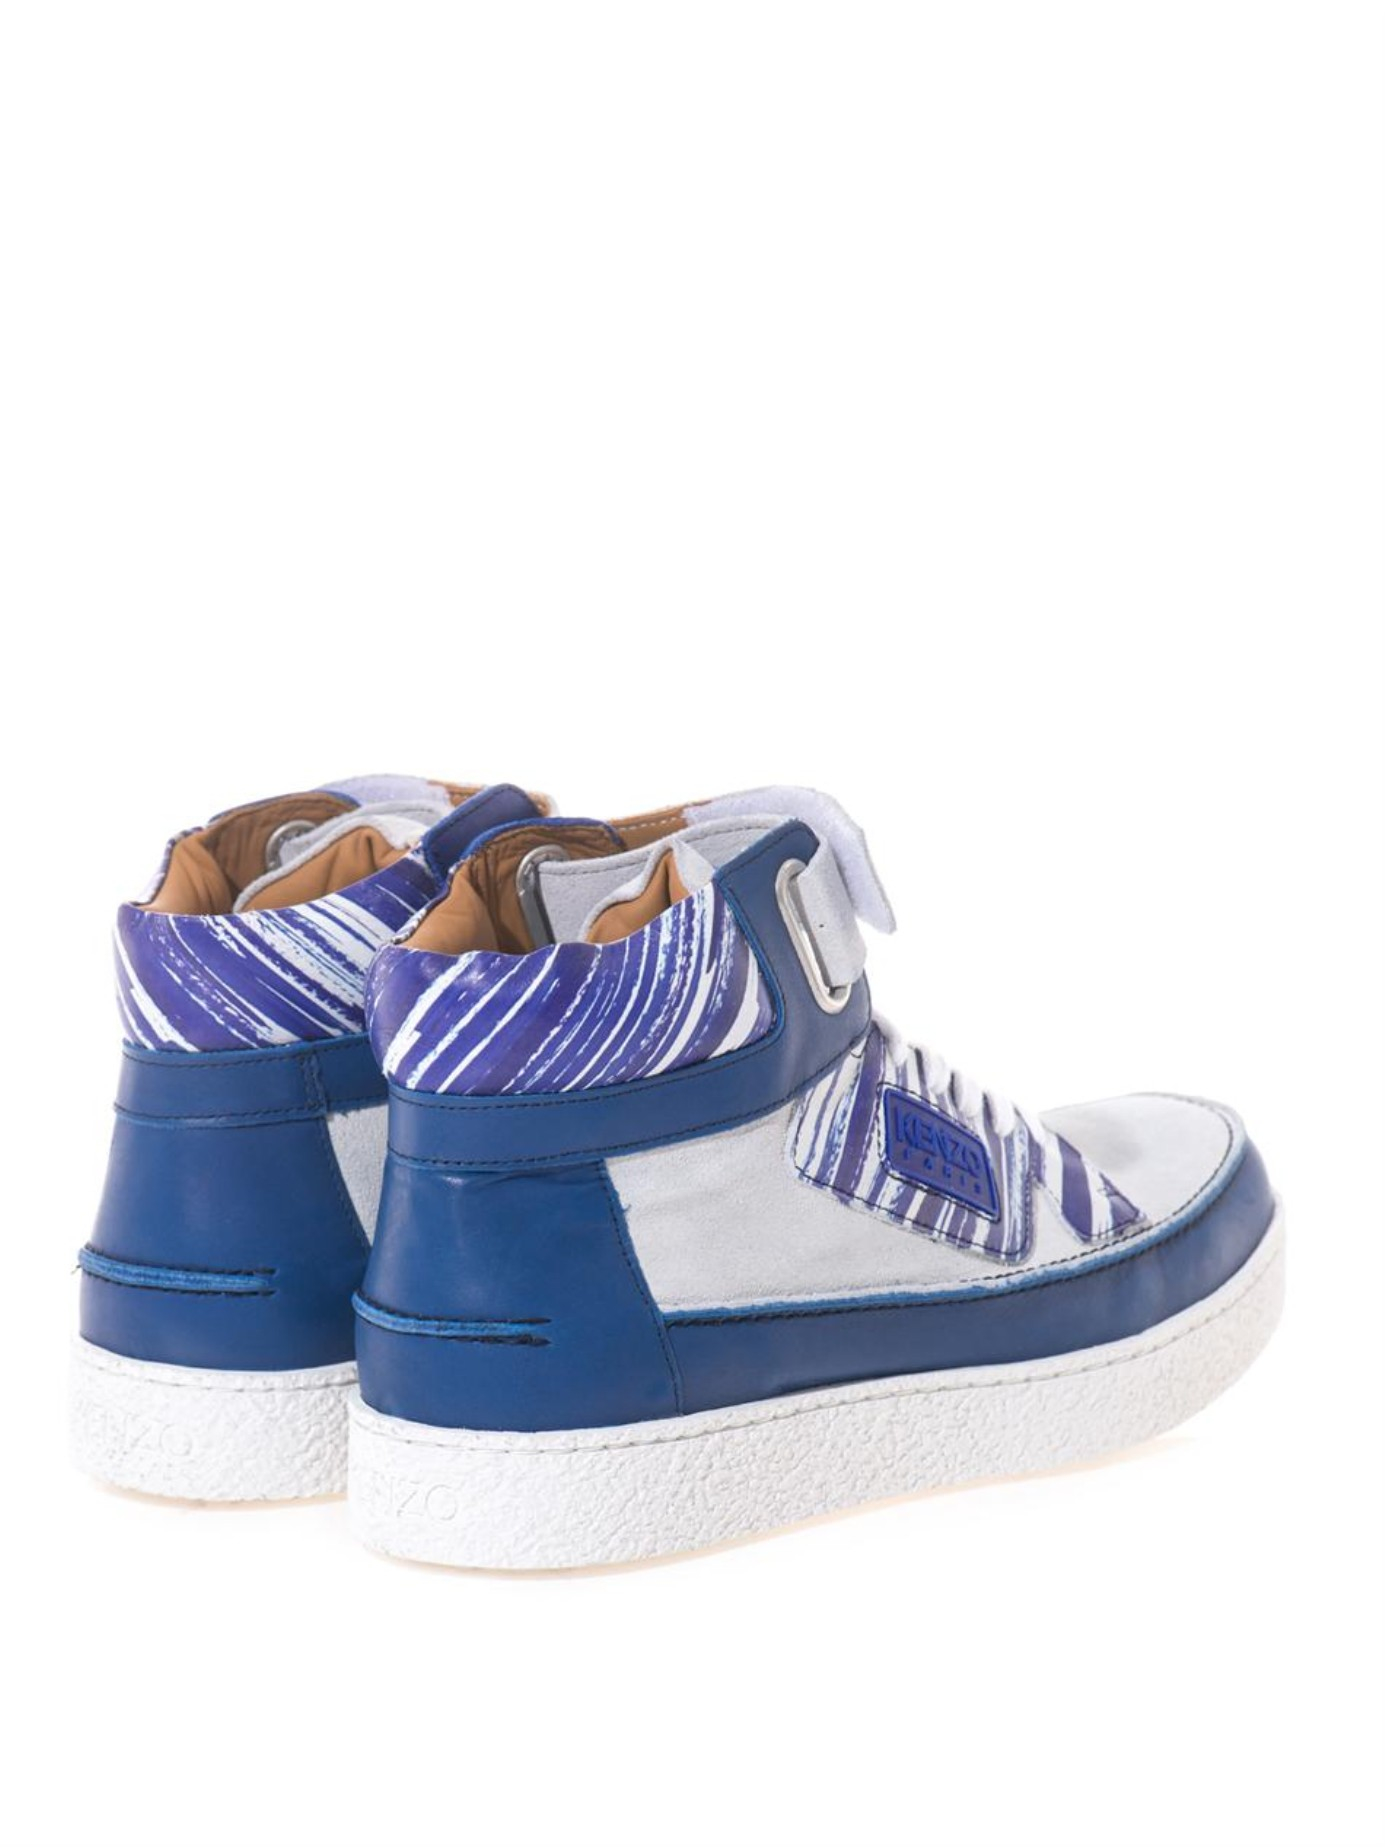 KENZO Kenyon Wave-Print High-Top Sneakers in White (Blue) for Men - Lyst